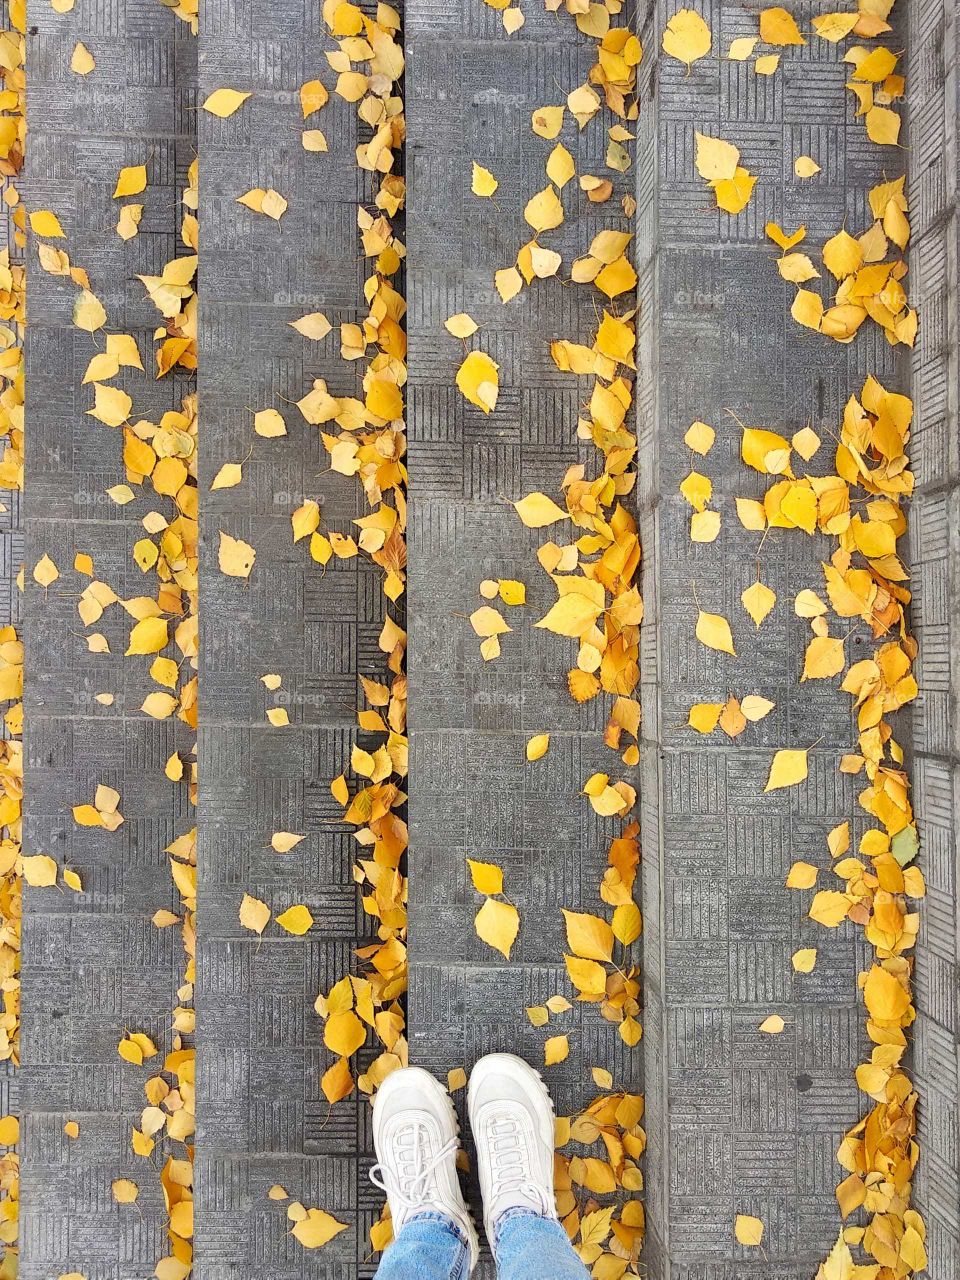 Selfie photo of feet on the background of the stairs strewn with yellow birch leaves